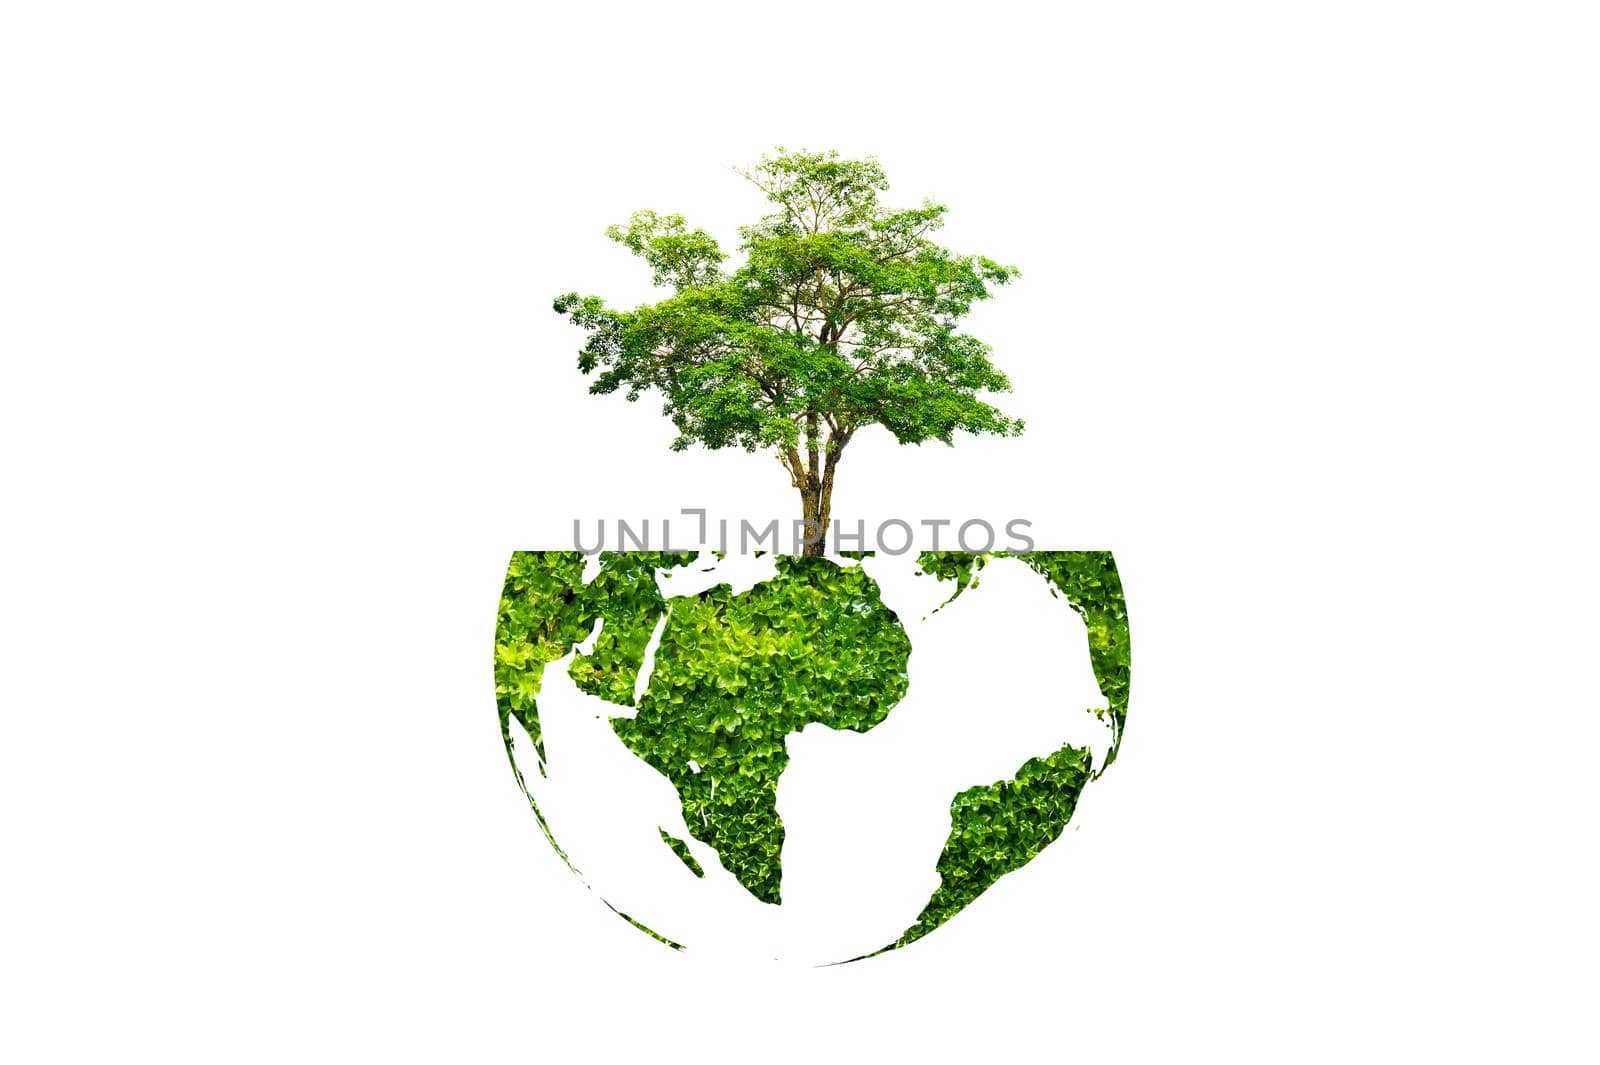 earth day tree on green earth on white isolate background